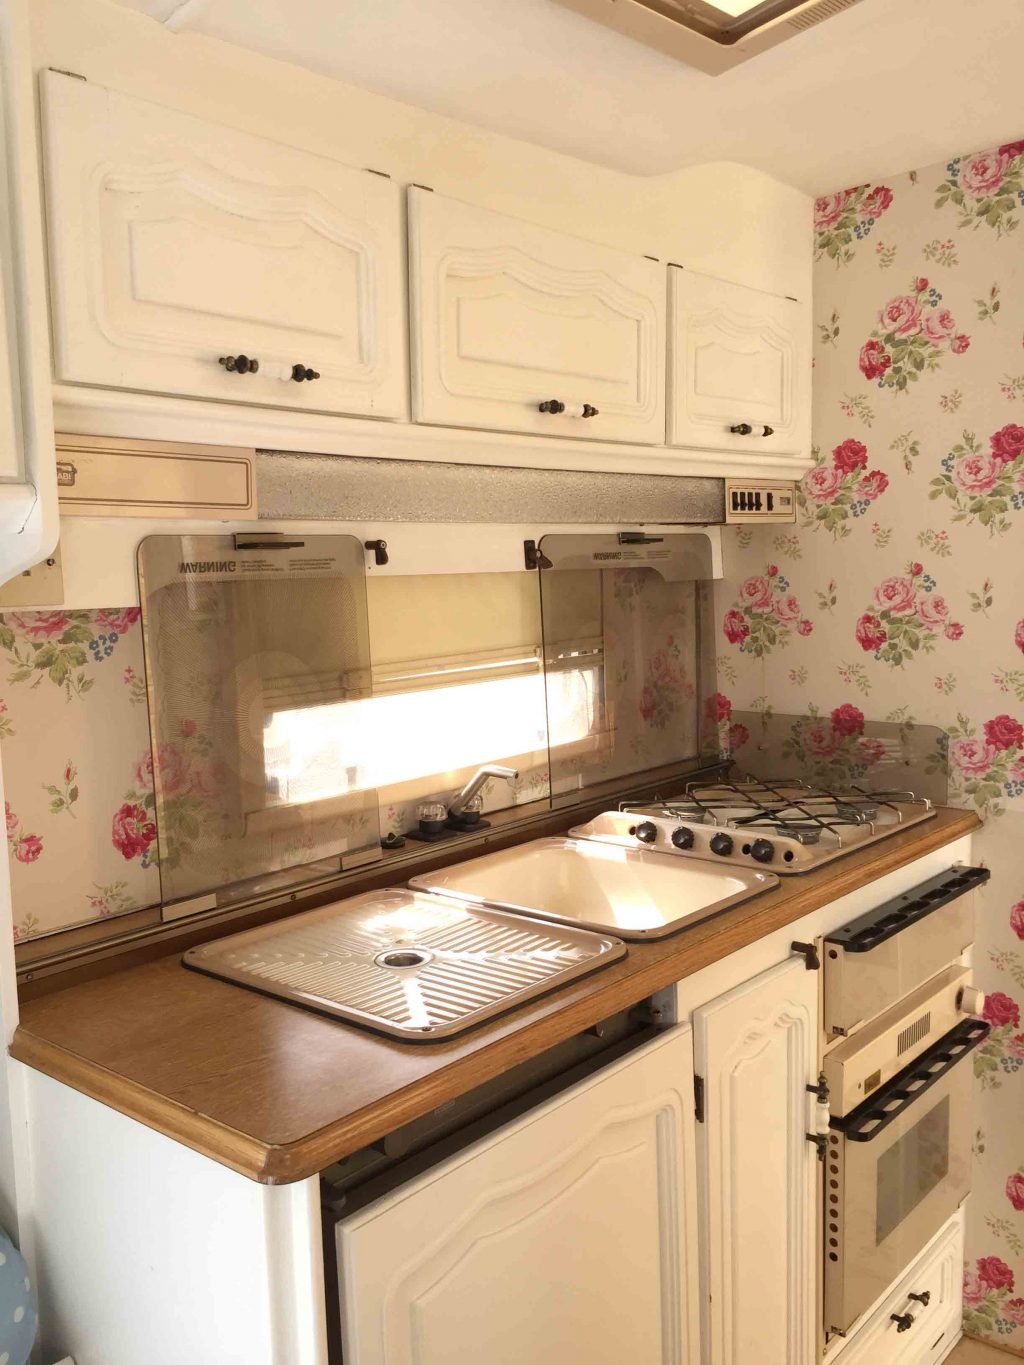 Dolly the caravan's kitchen area; after it had been painted as part of my first caravan makeover. I painted the units white and wallpapered the wall's with Cath Kidston wallpaper. More info on both of my caravan makeovers on the blog!